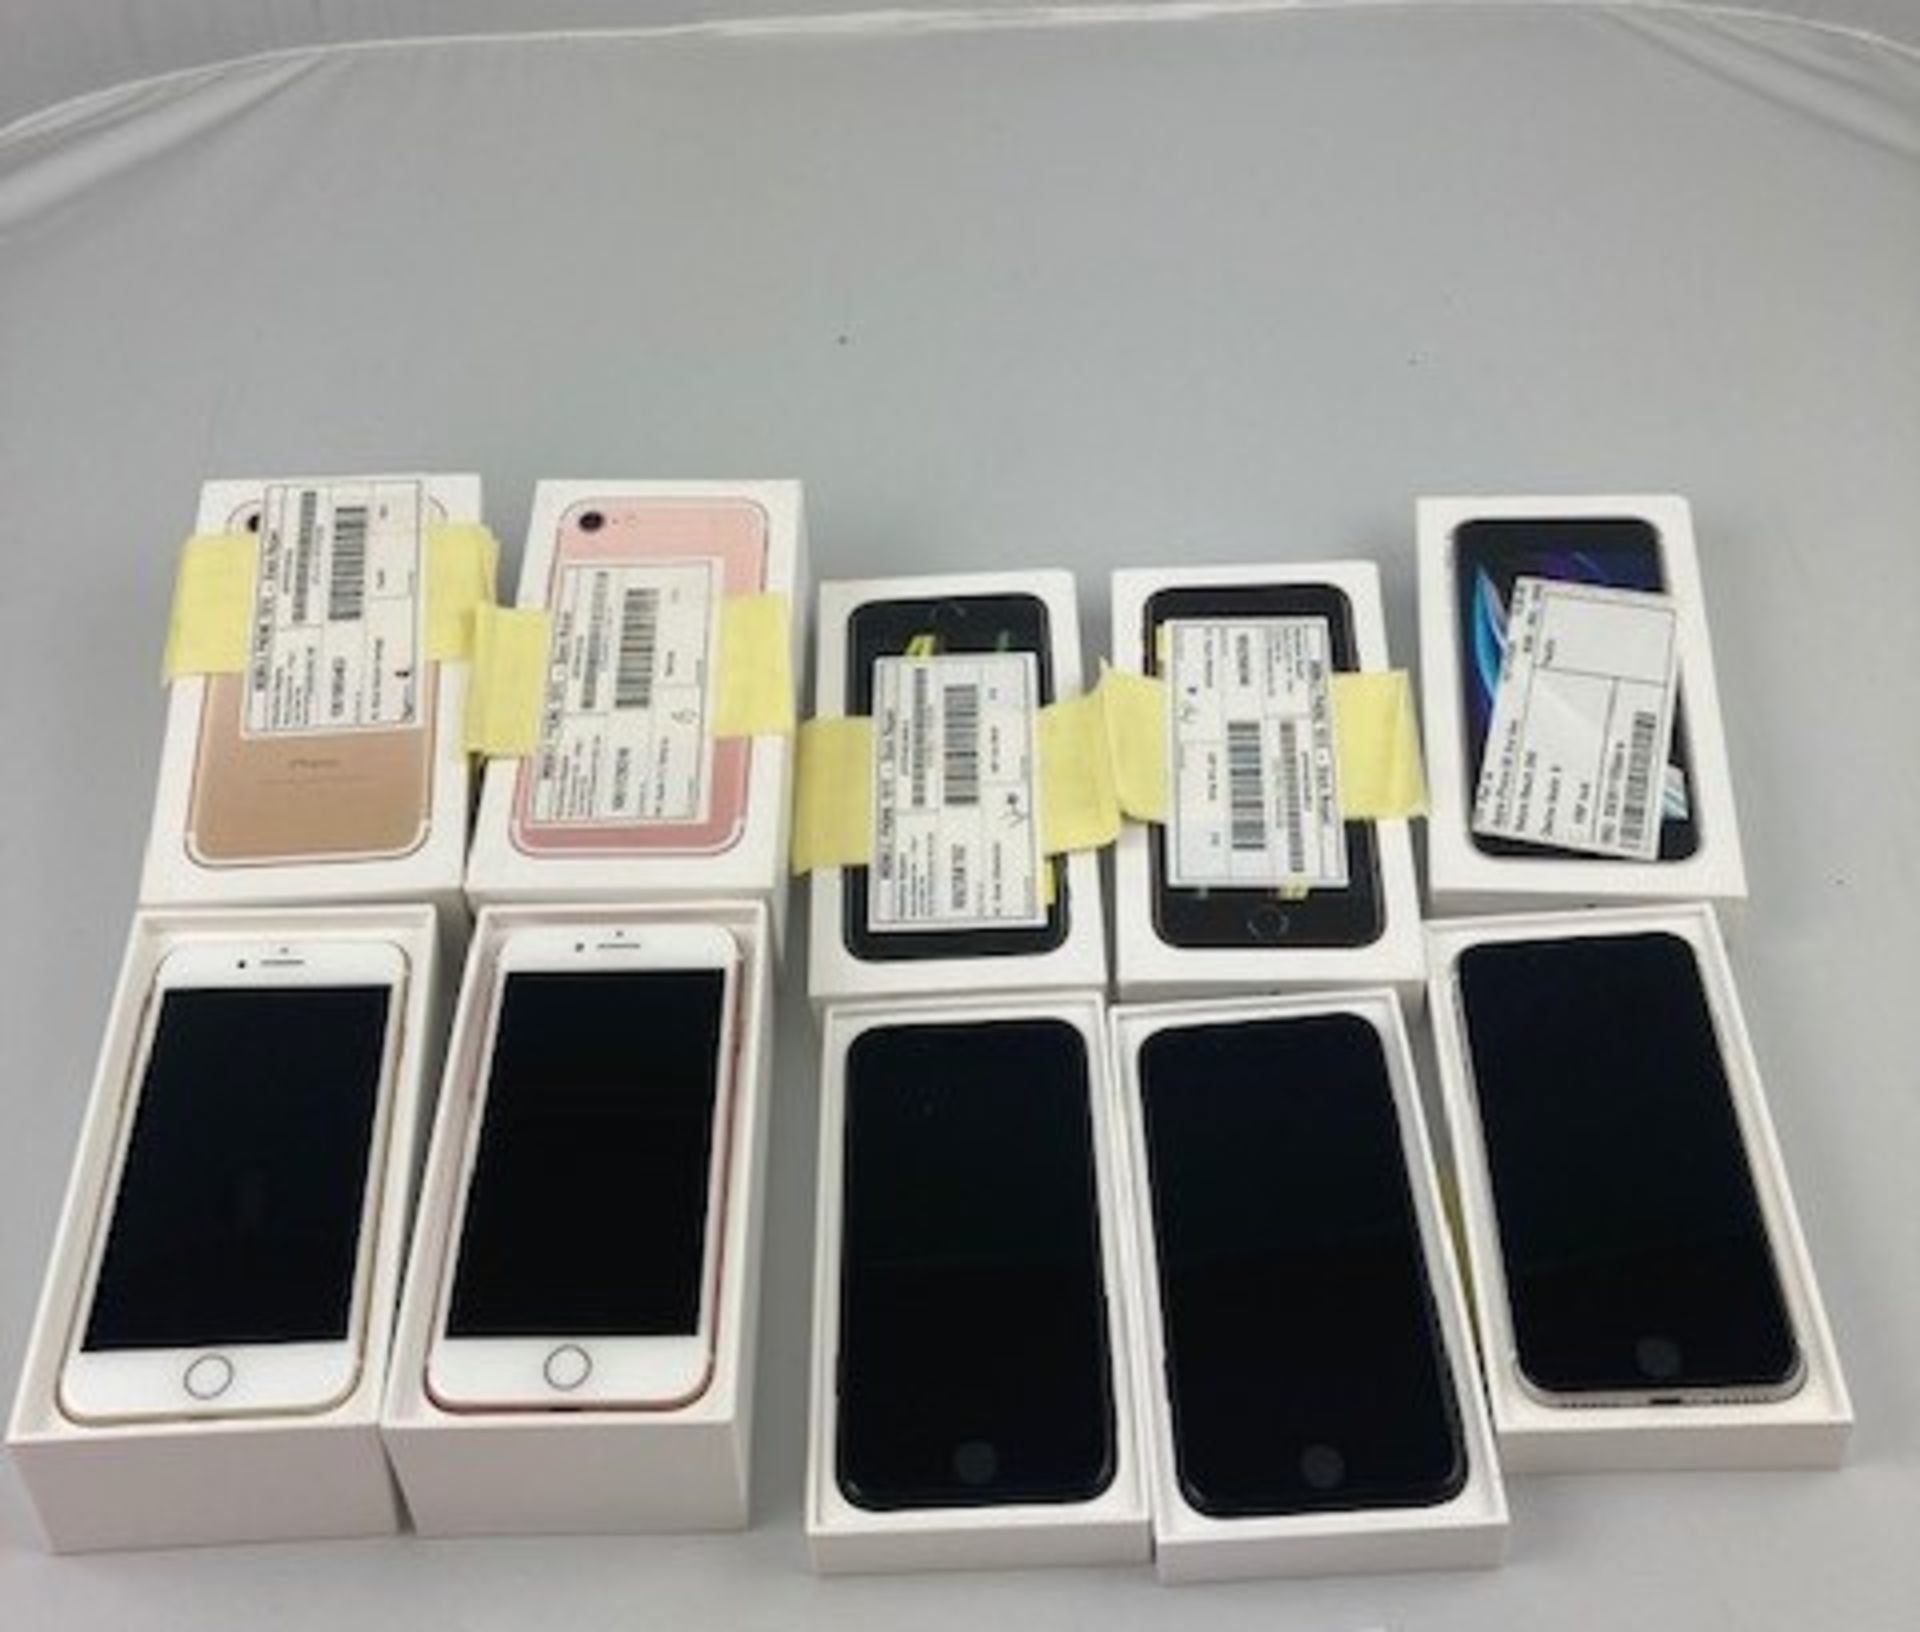 Box of 5 Apple Iphones. Latest selling price £1197.00*